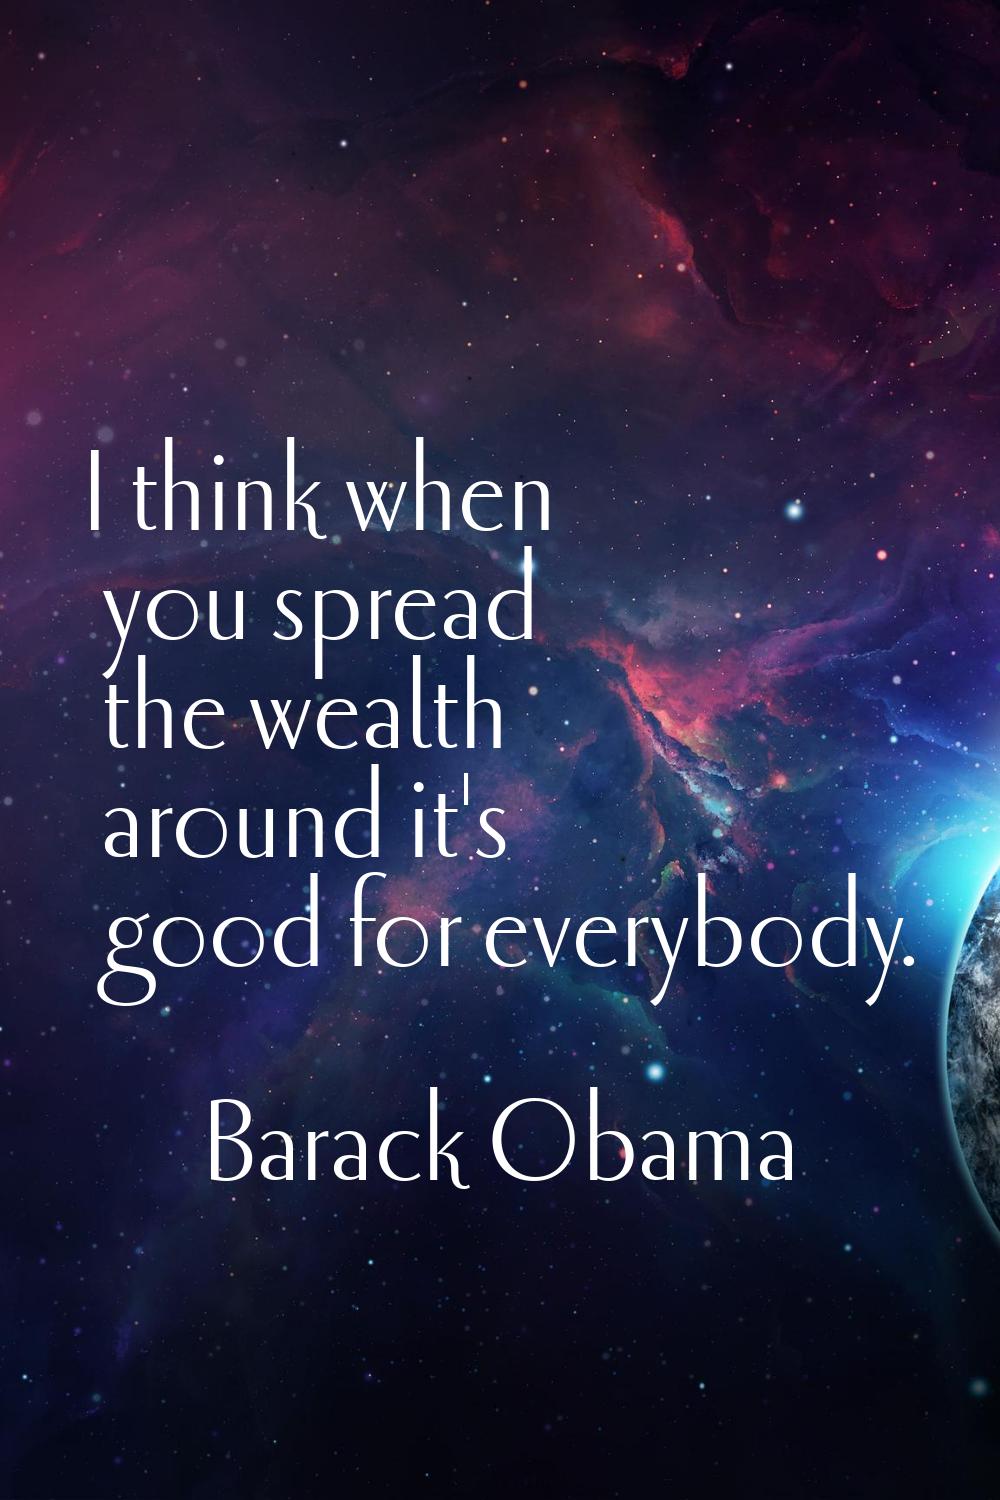 I think when you spread the wealth around it's good for everybody.